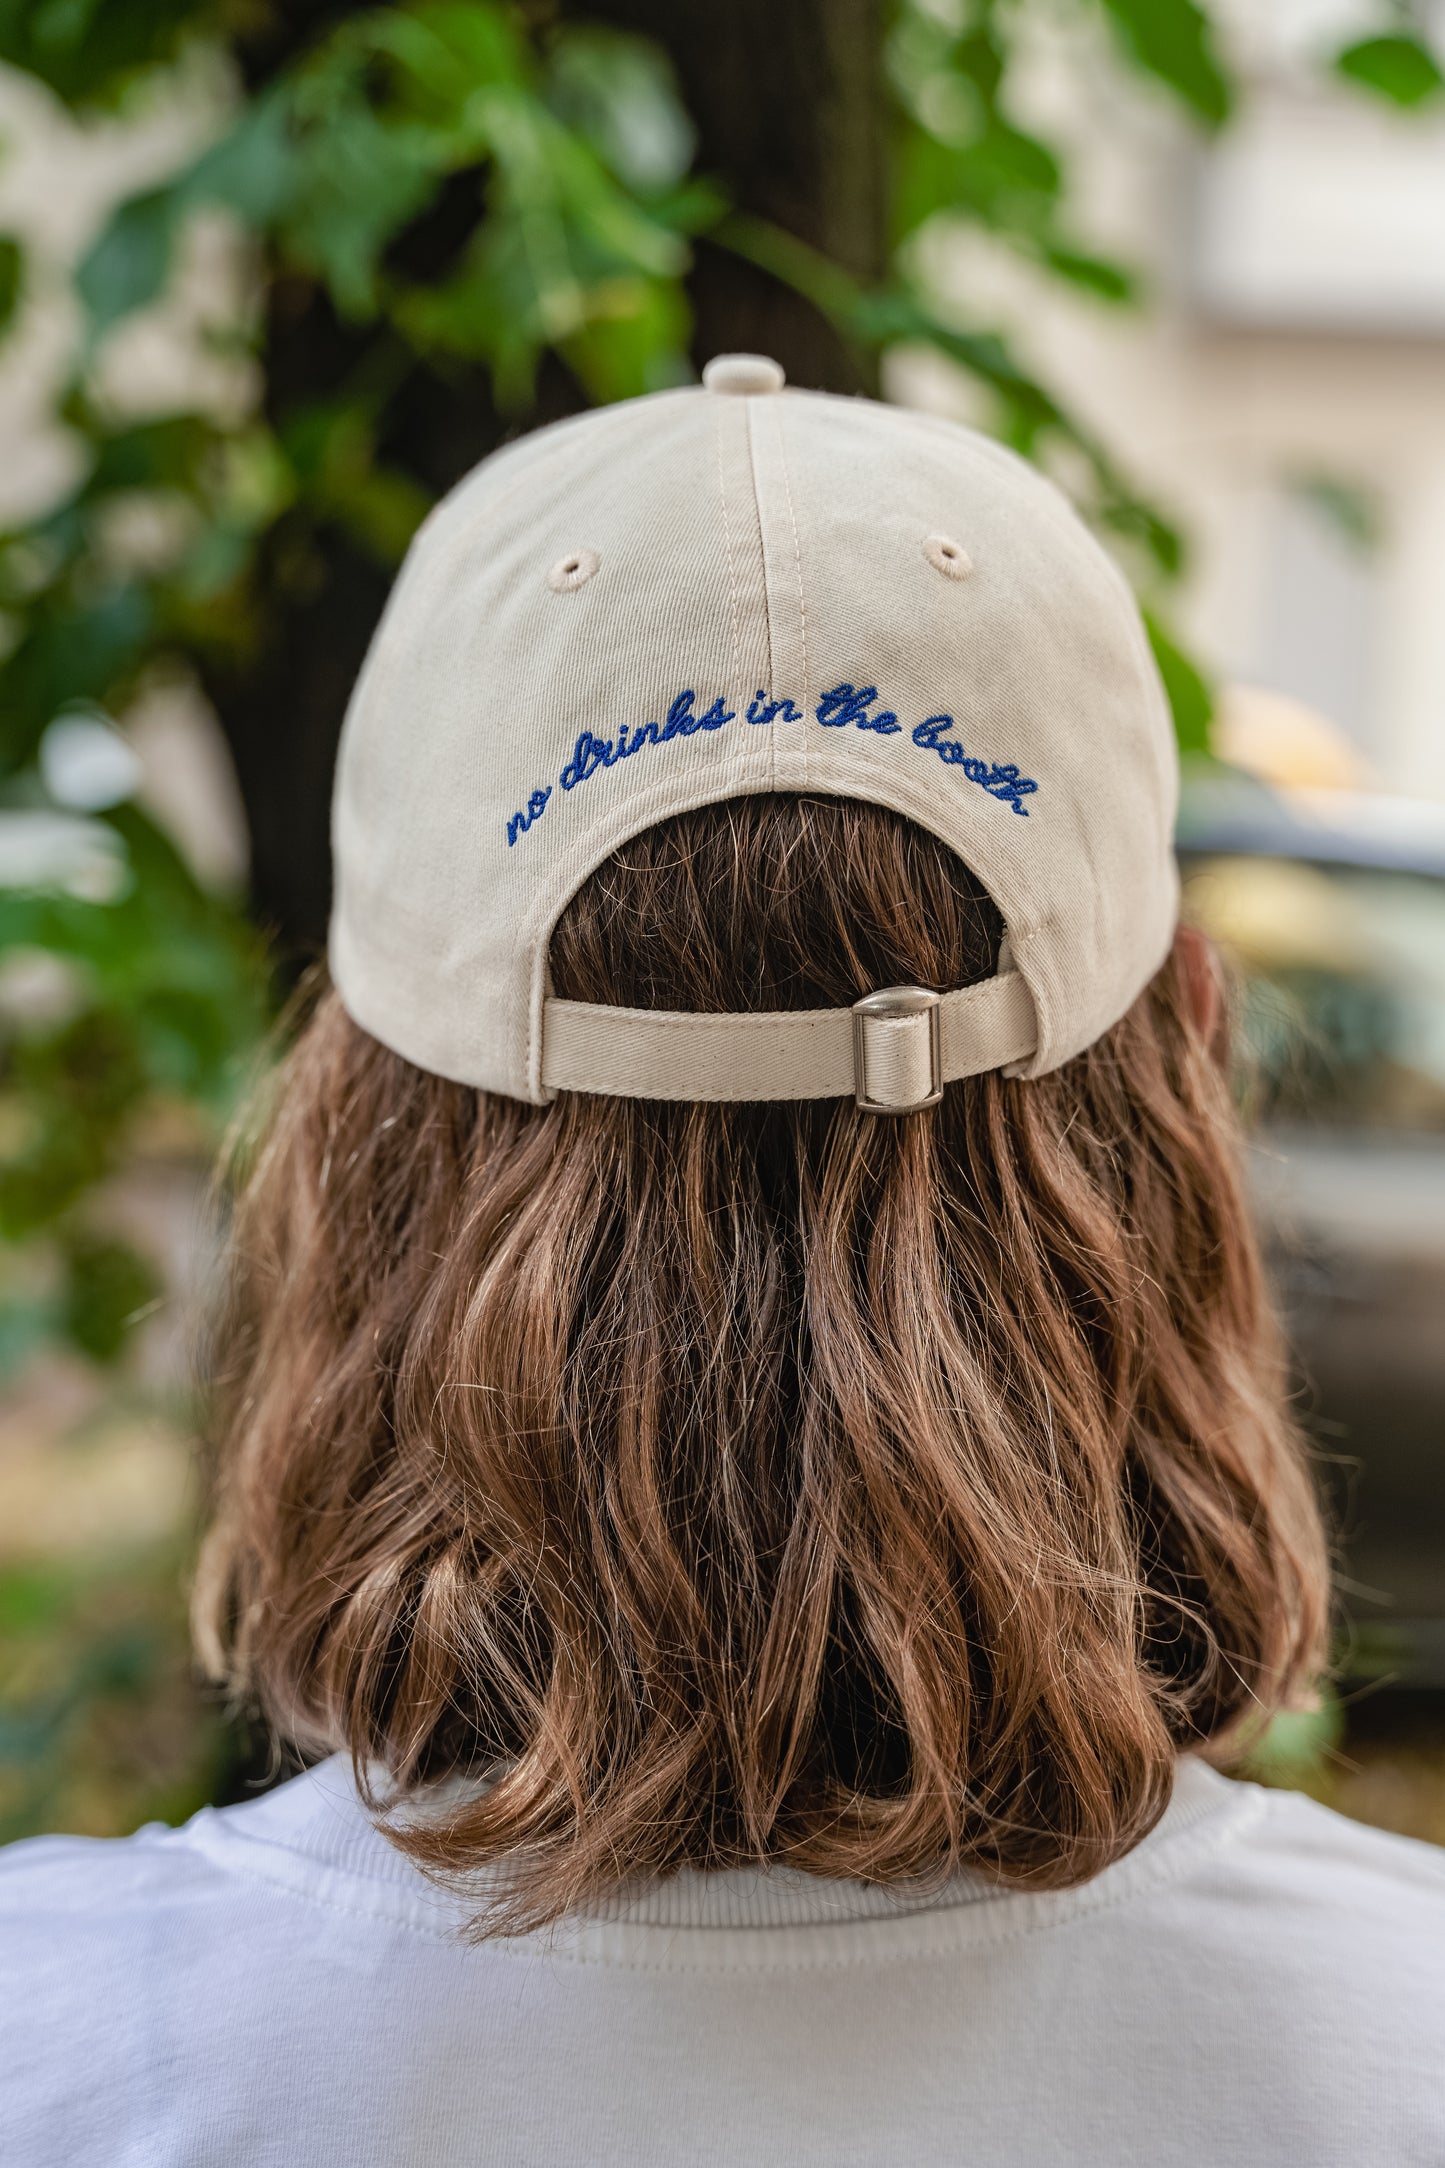 No Drinks in the Booth - Baseball Cap (Off-White / Blue)